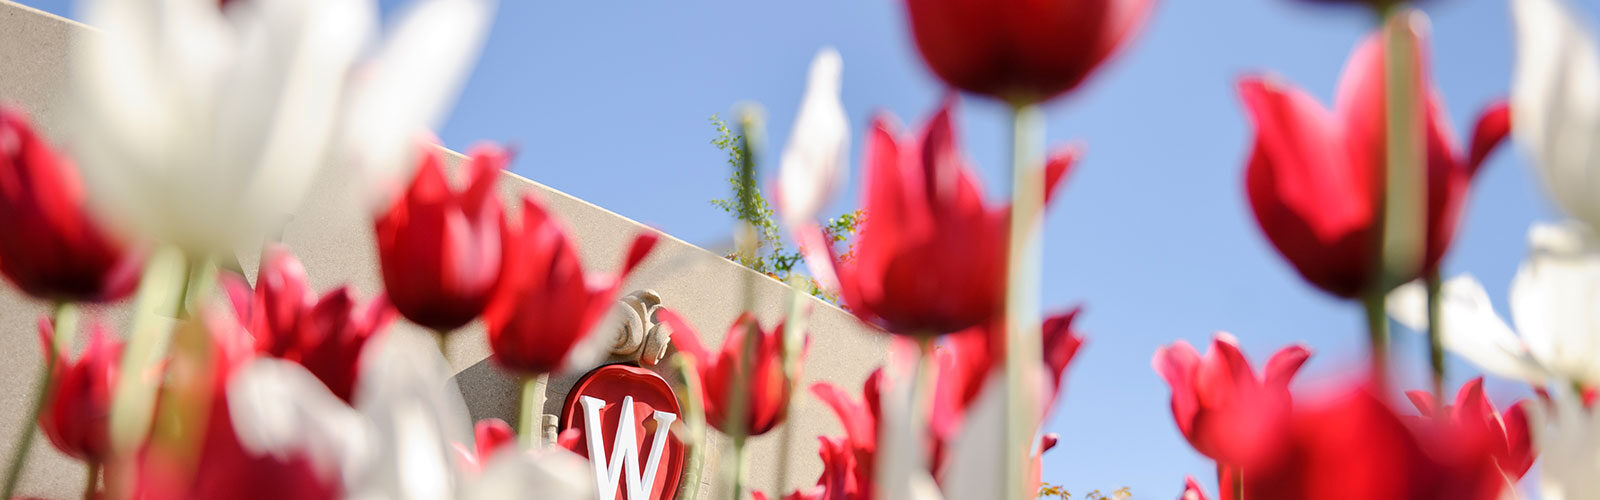 red tulips taken from the ground up with a UW crest pictured on a building in the background.